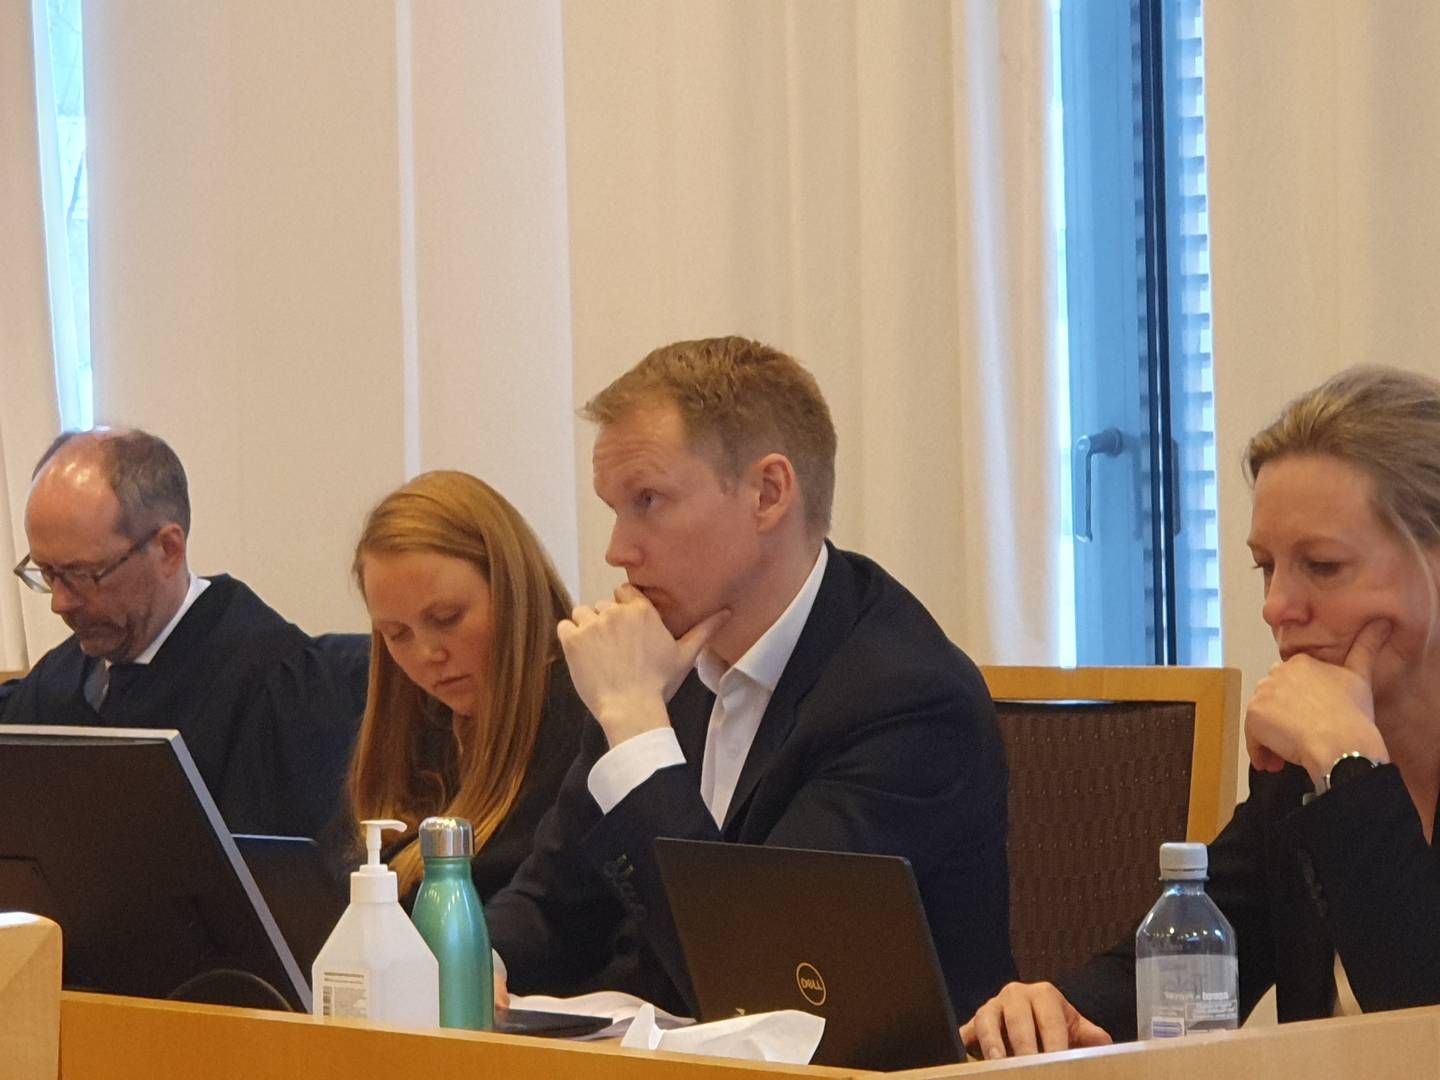 These four people showed up in court on behalf of Norges Bank and the Norwegian oil fund for the case which has been brought to court by former head of trading analytics at the Oil fund, Elisabeth Bull Daae. From left: Lawyers Jan Fougner and Oda Indset, along with CIO Geir Øyvind Nygård and senior legal counsel Aase Løne from Norges Bank. | Photo: Ida Oftebro